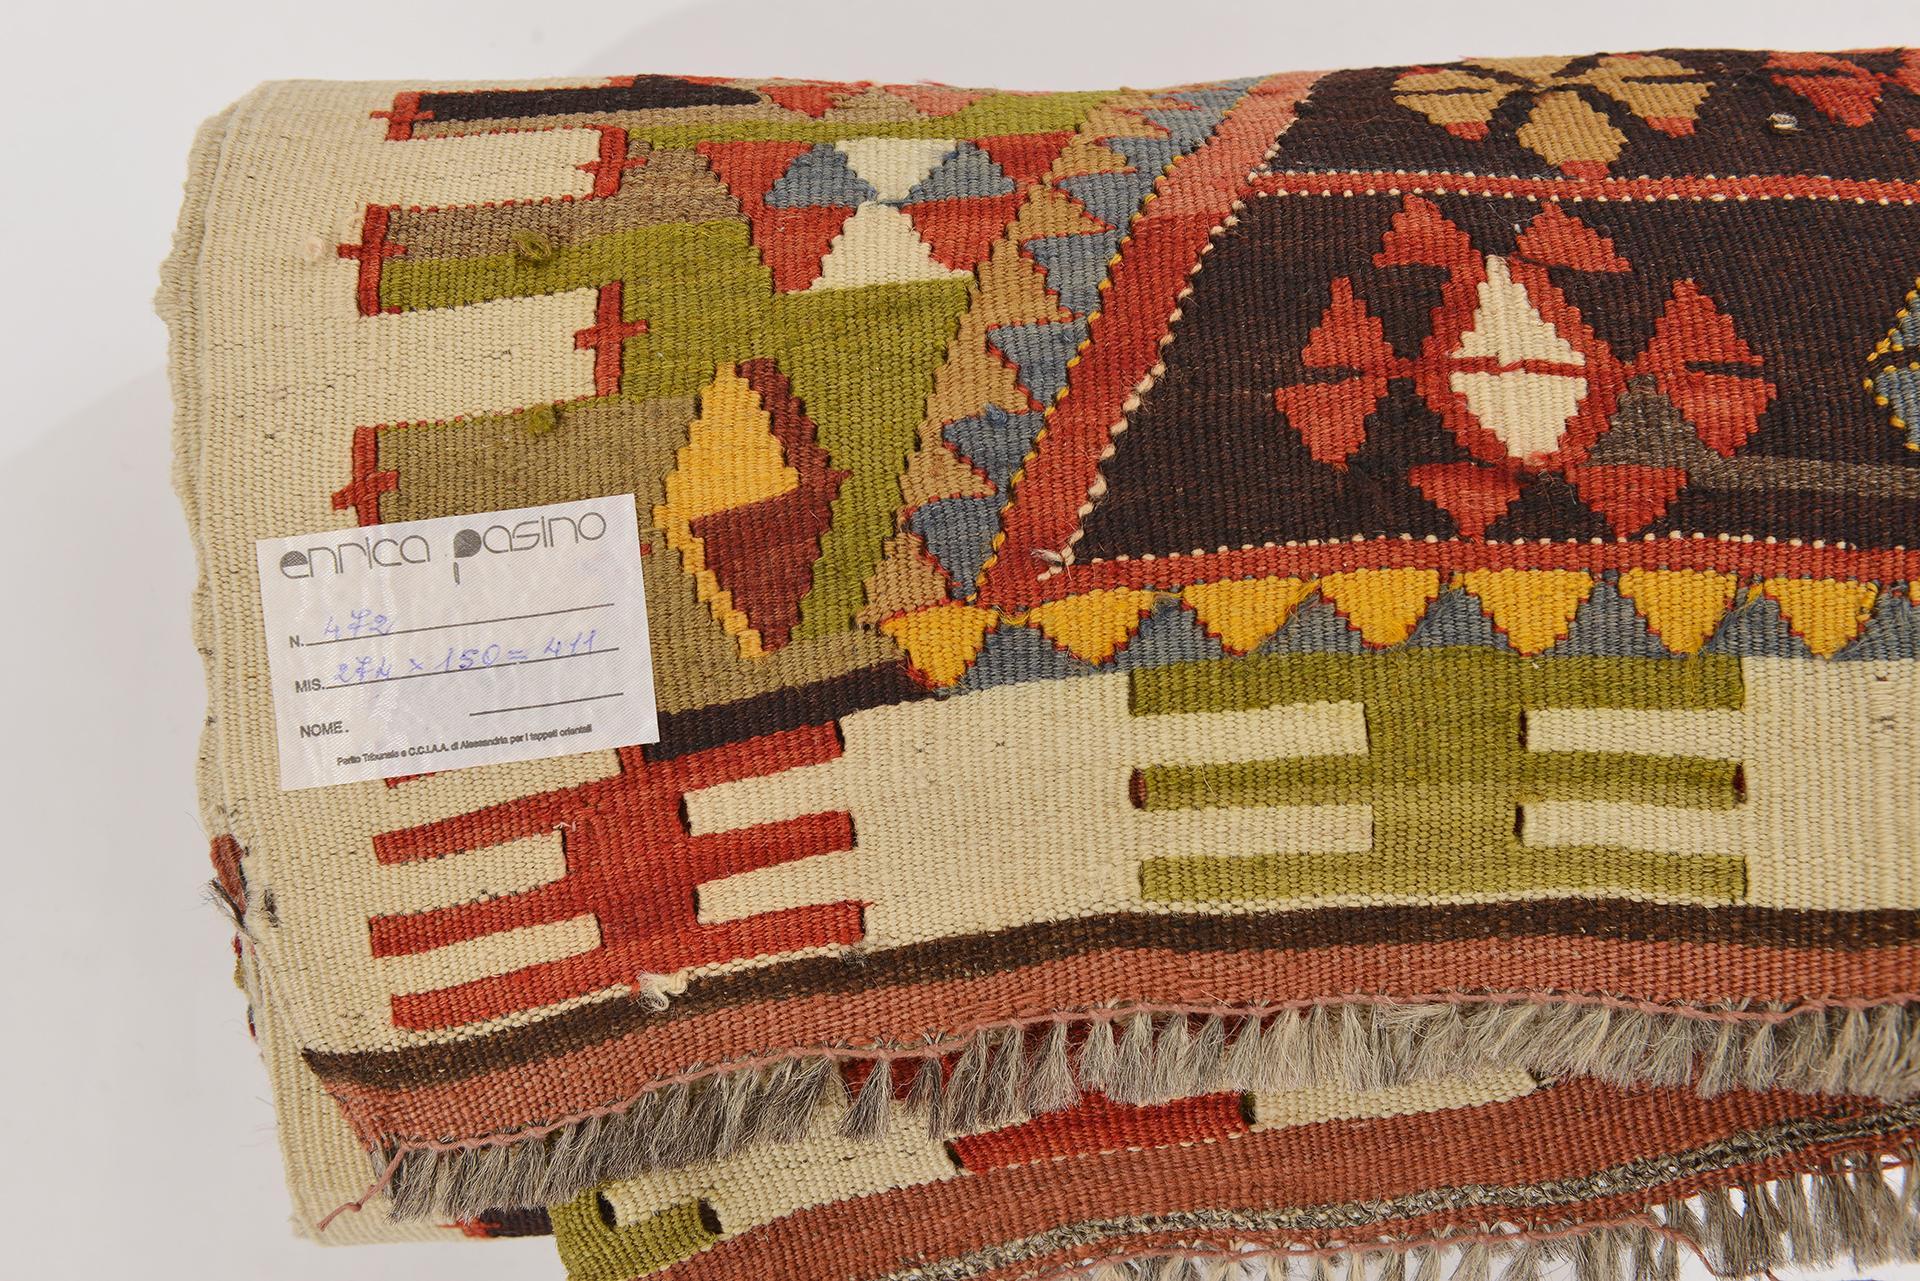 nr. 472 - One of the most famous Turkish kilim, well known for beauty, pastel colors and quality of wool.
Perfect everywhere: sitting or sleeping room, also on the wall like a modern tapestry.